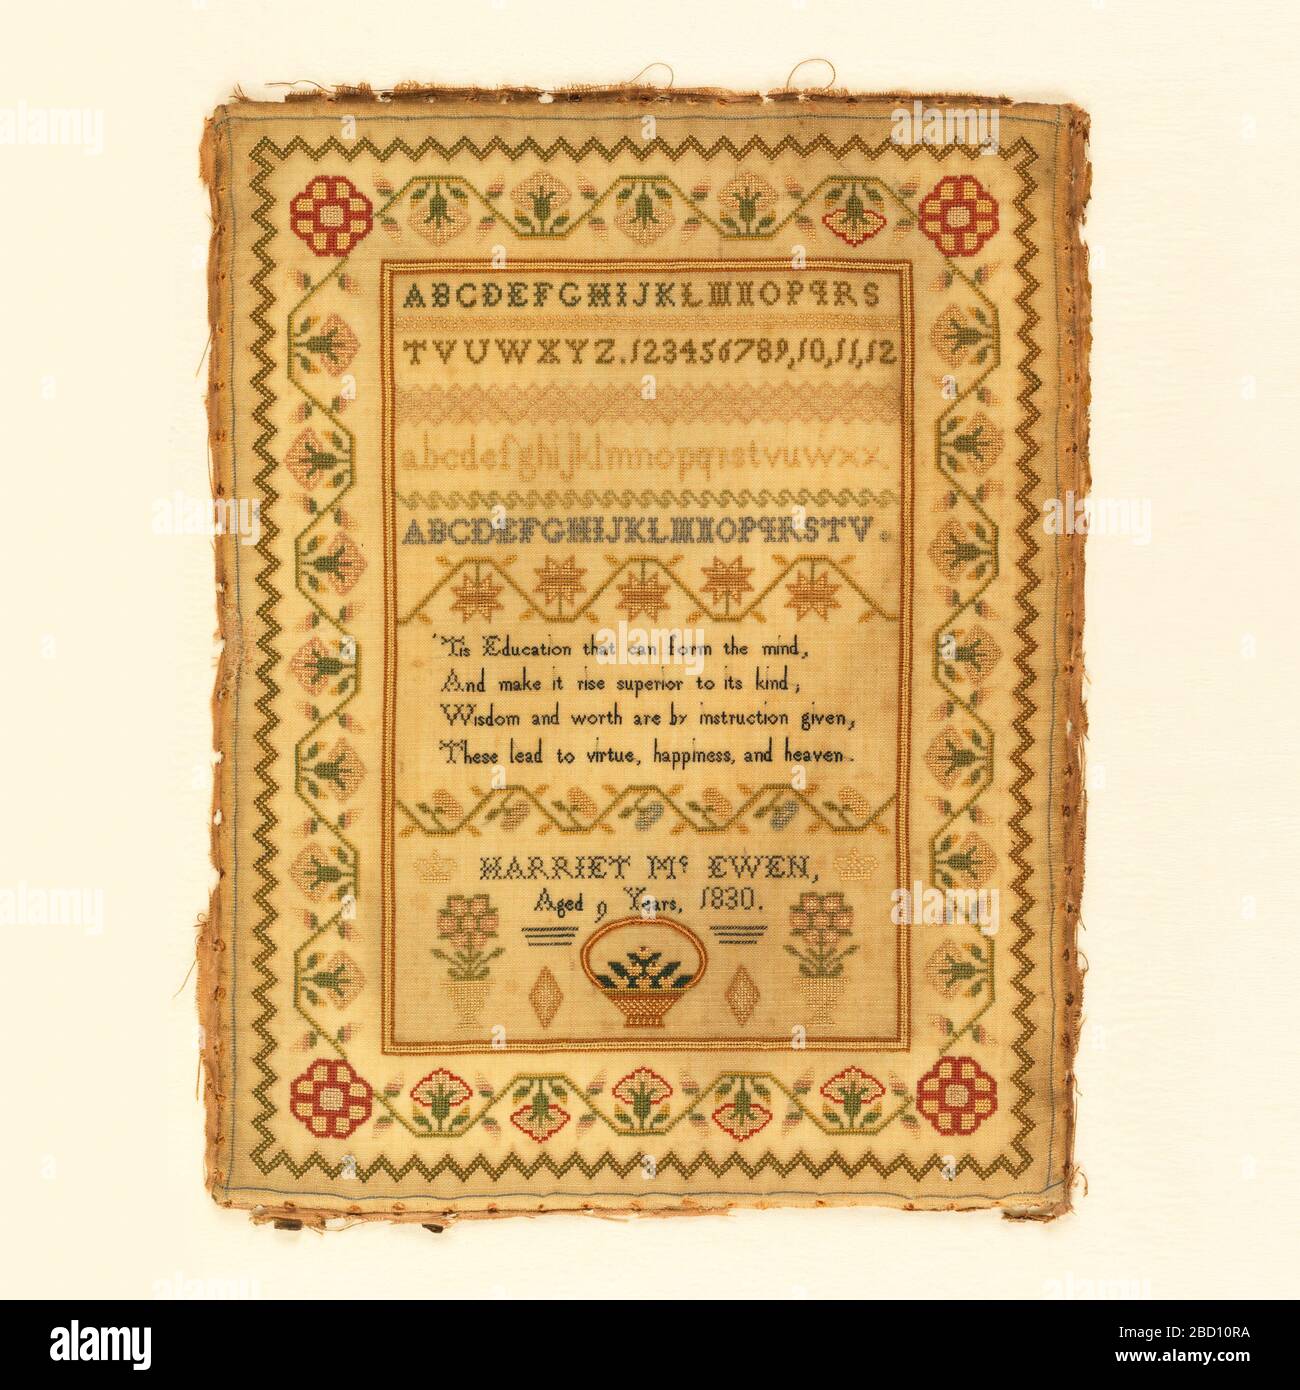 Sampler. Research in ProgressFour alphabets, one with numerals at the top. Verse: 'Tis education that conform the mind, and make it rise superior to its kind, wisdom and worth are by instruction given, these lead to virtue, happiness, and heaven. Sampler Stock Photo